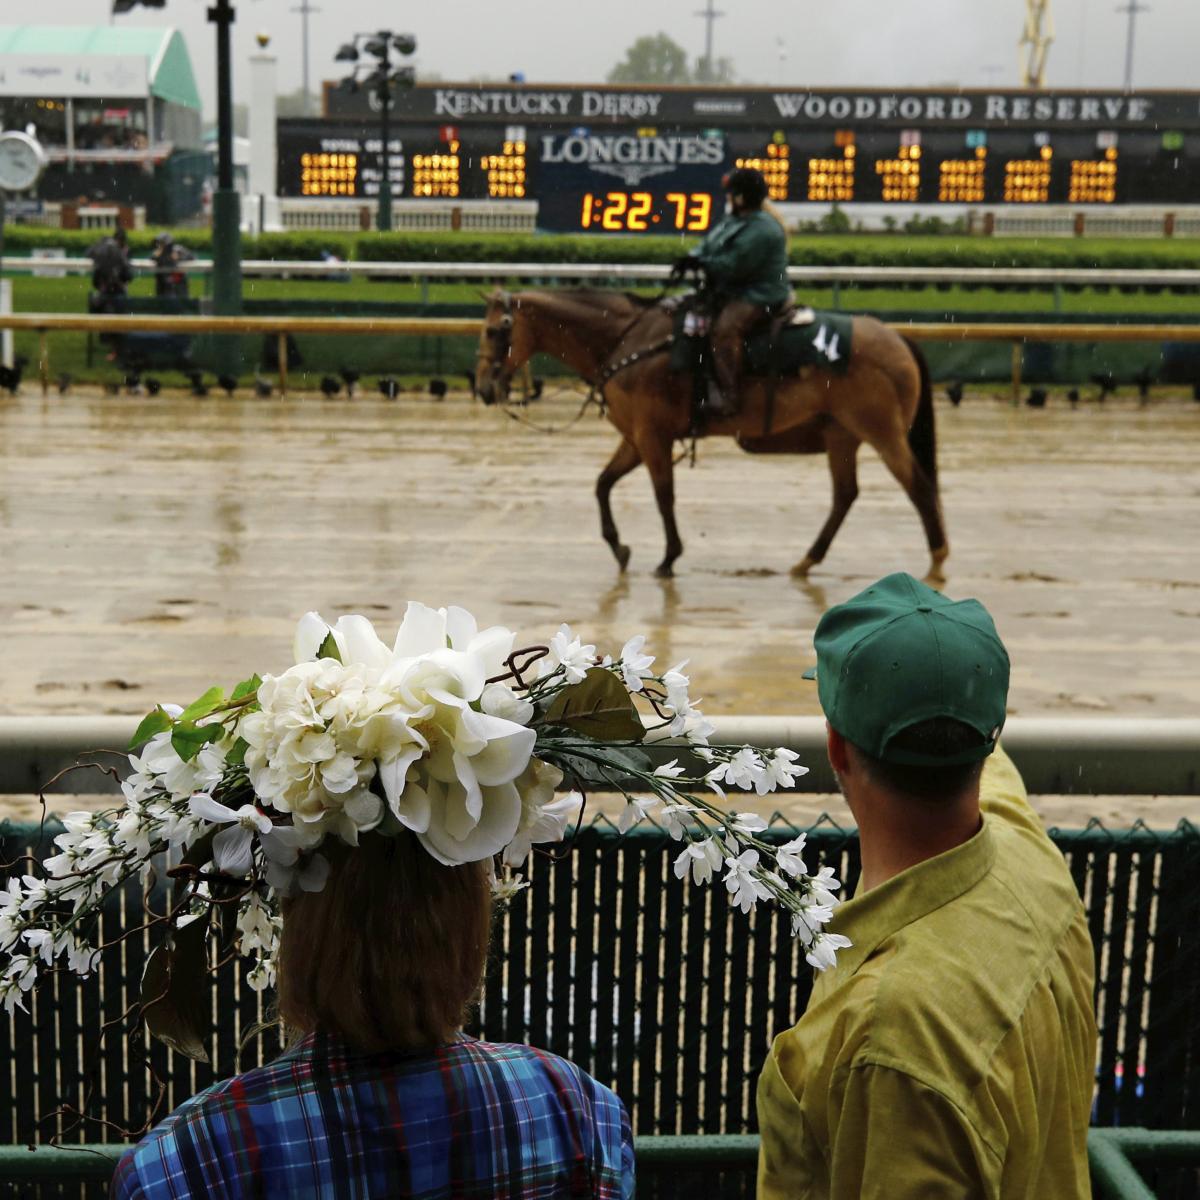 2018 Kentucky Derby Breaks Record as Wettest Ever with over 2.31 Inches